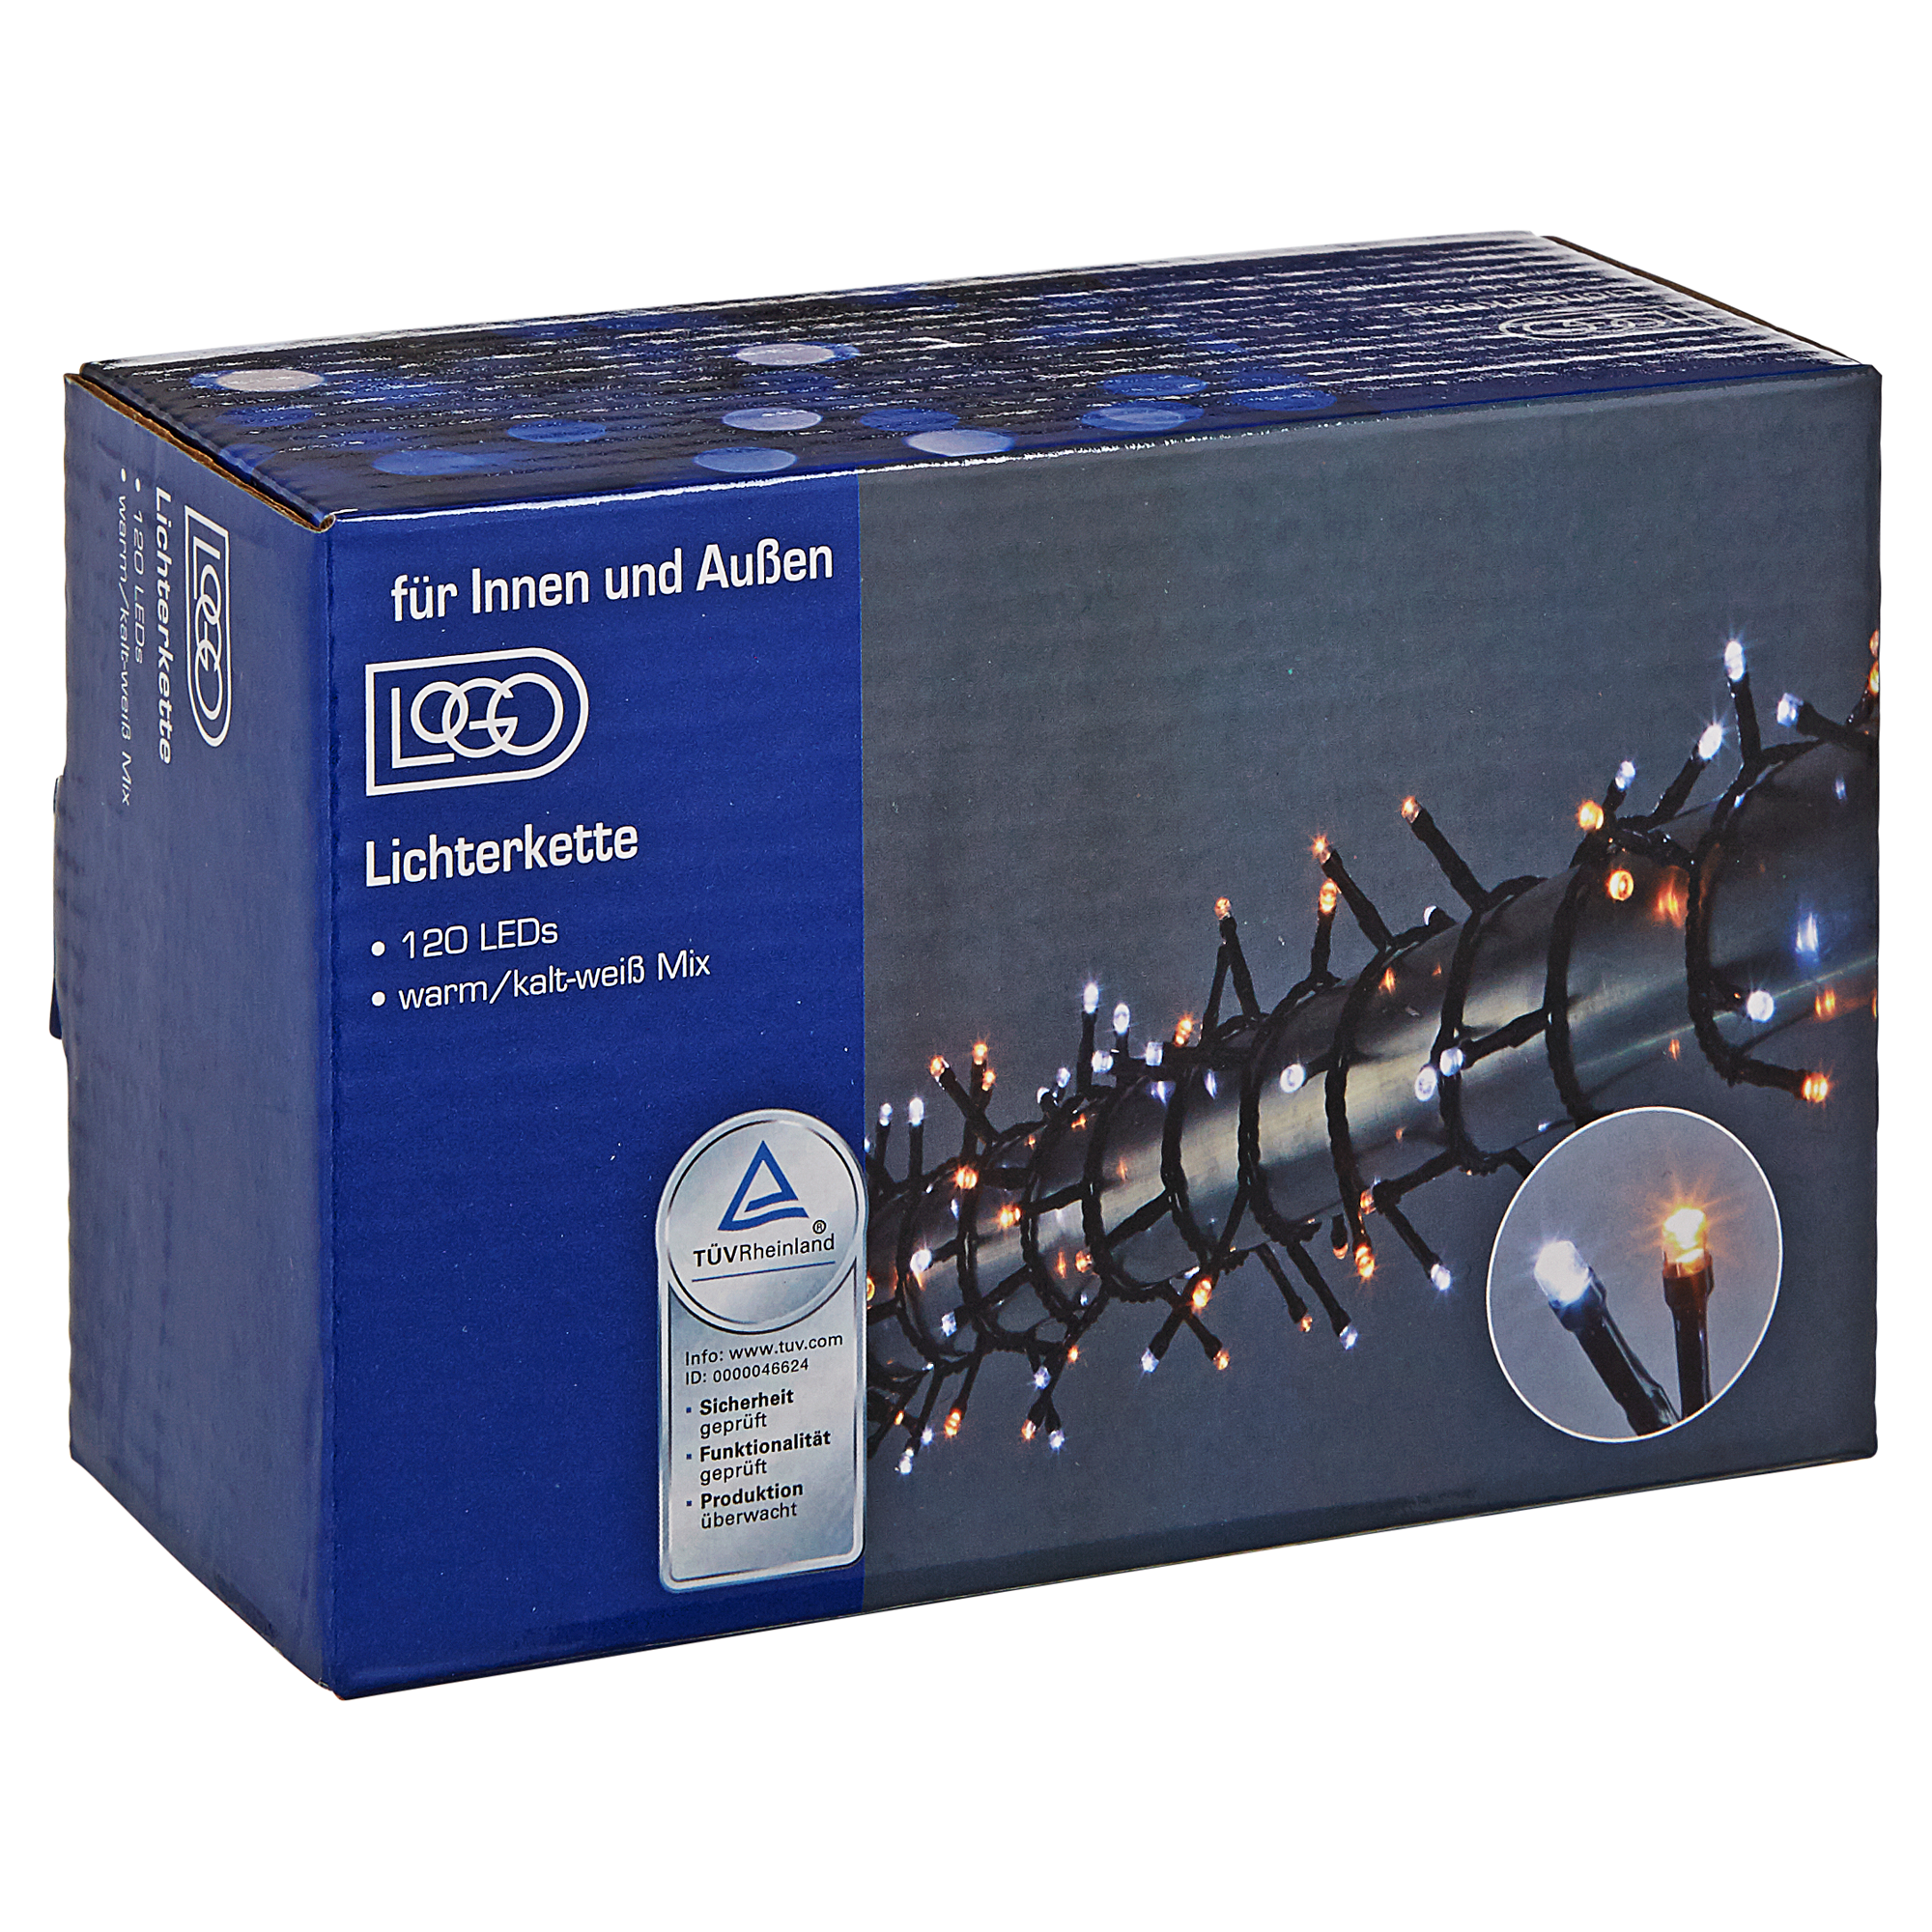 Weihnachtsbeleuchtung LED-Lichterkette 120 LEDs + product picture